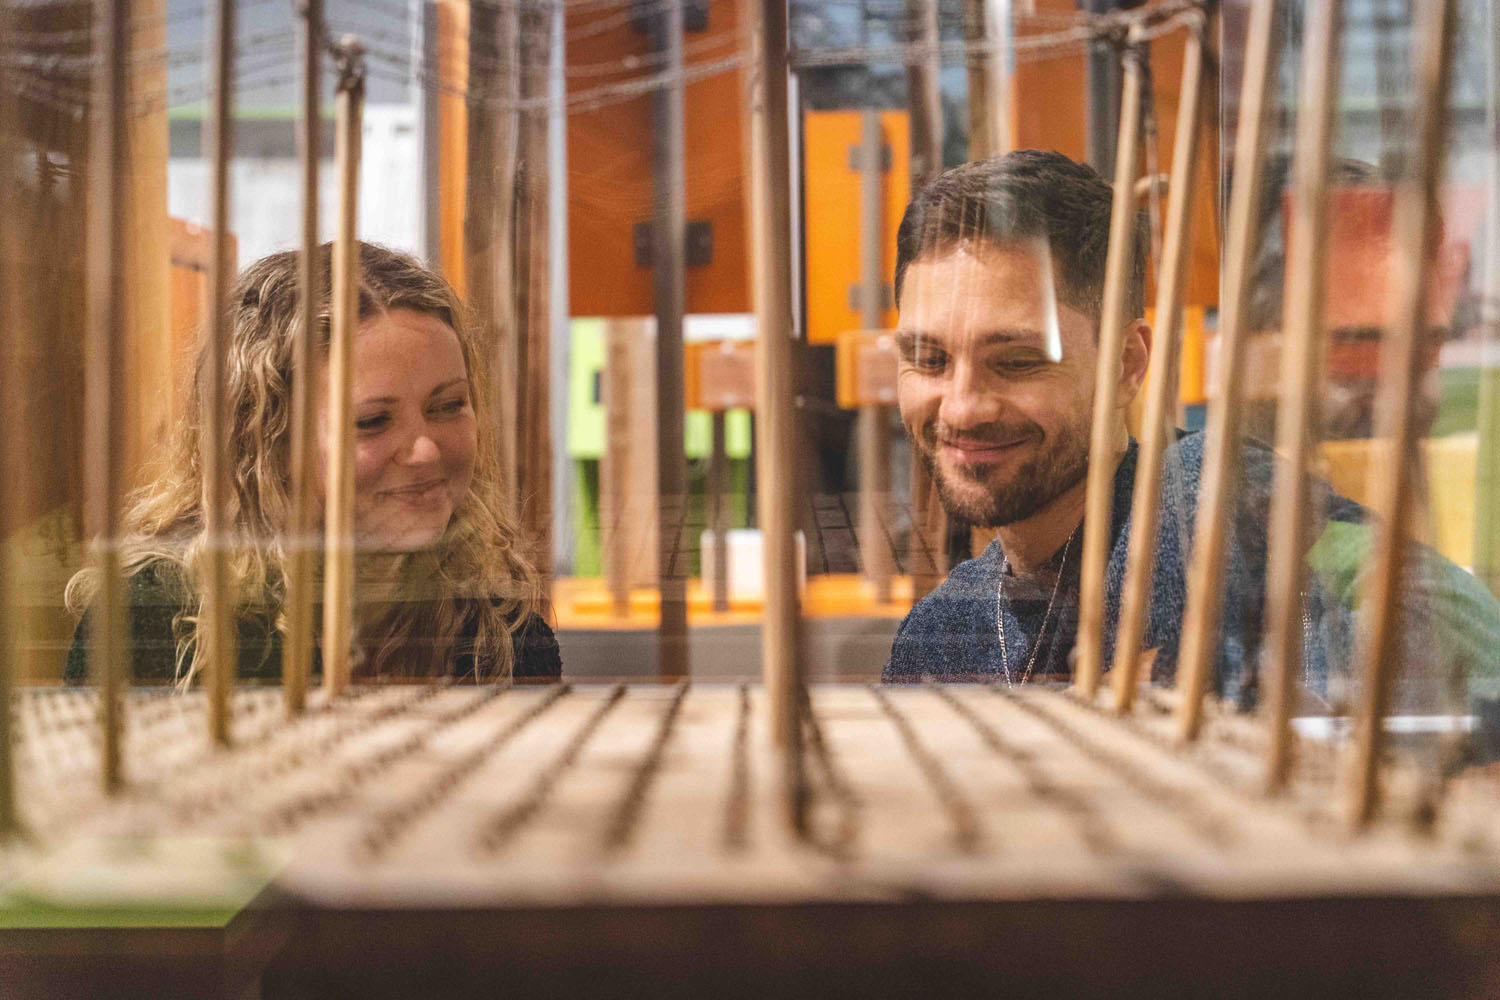 Two visitors study the model of a hop garden